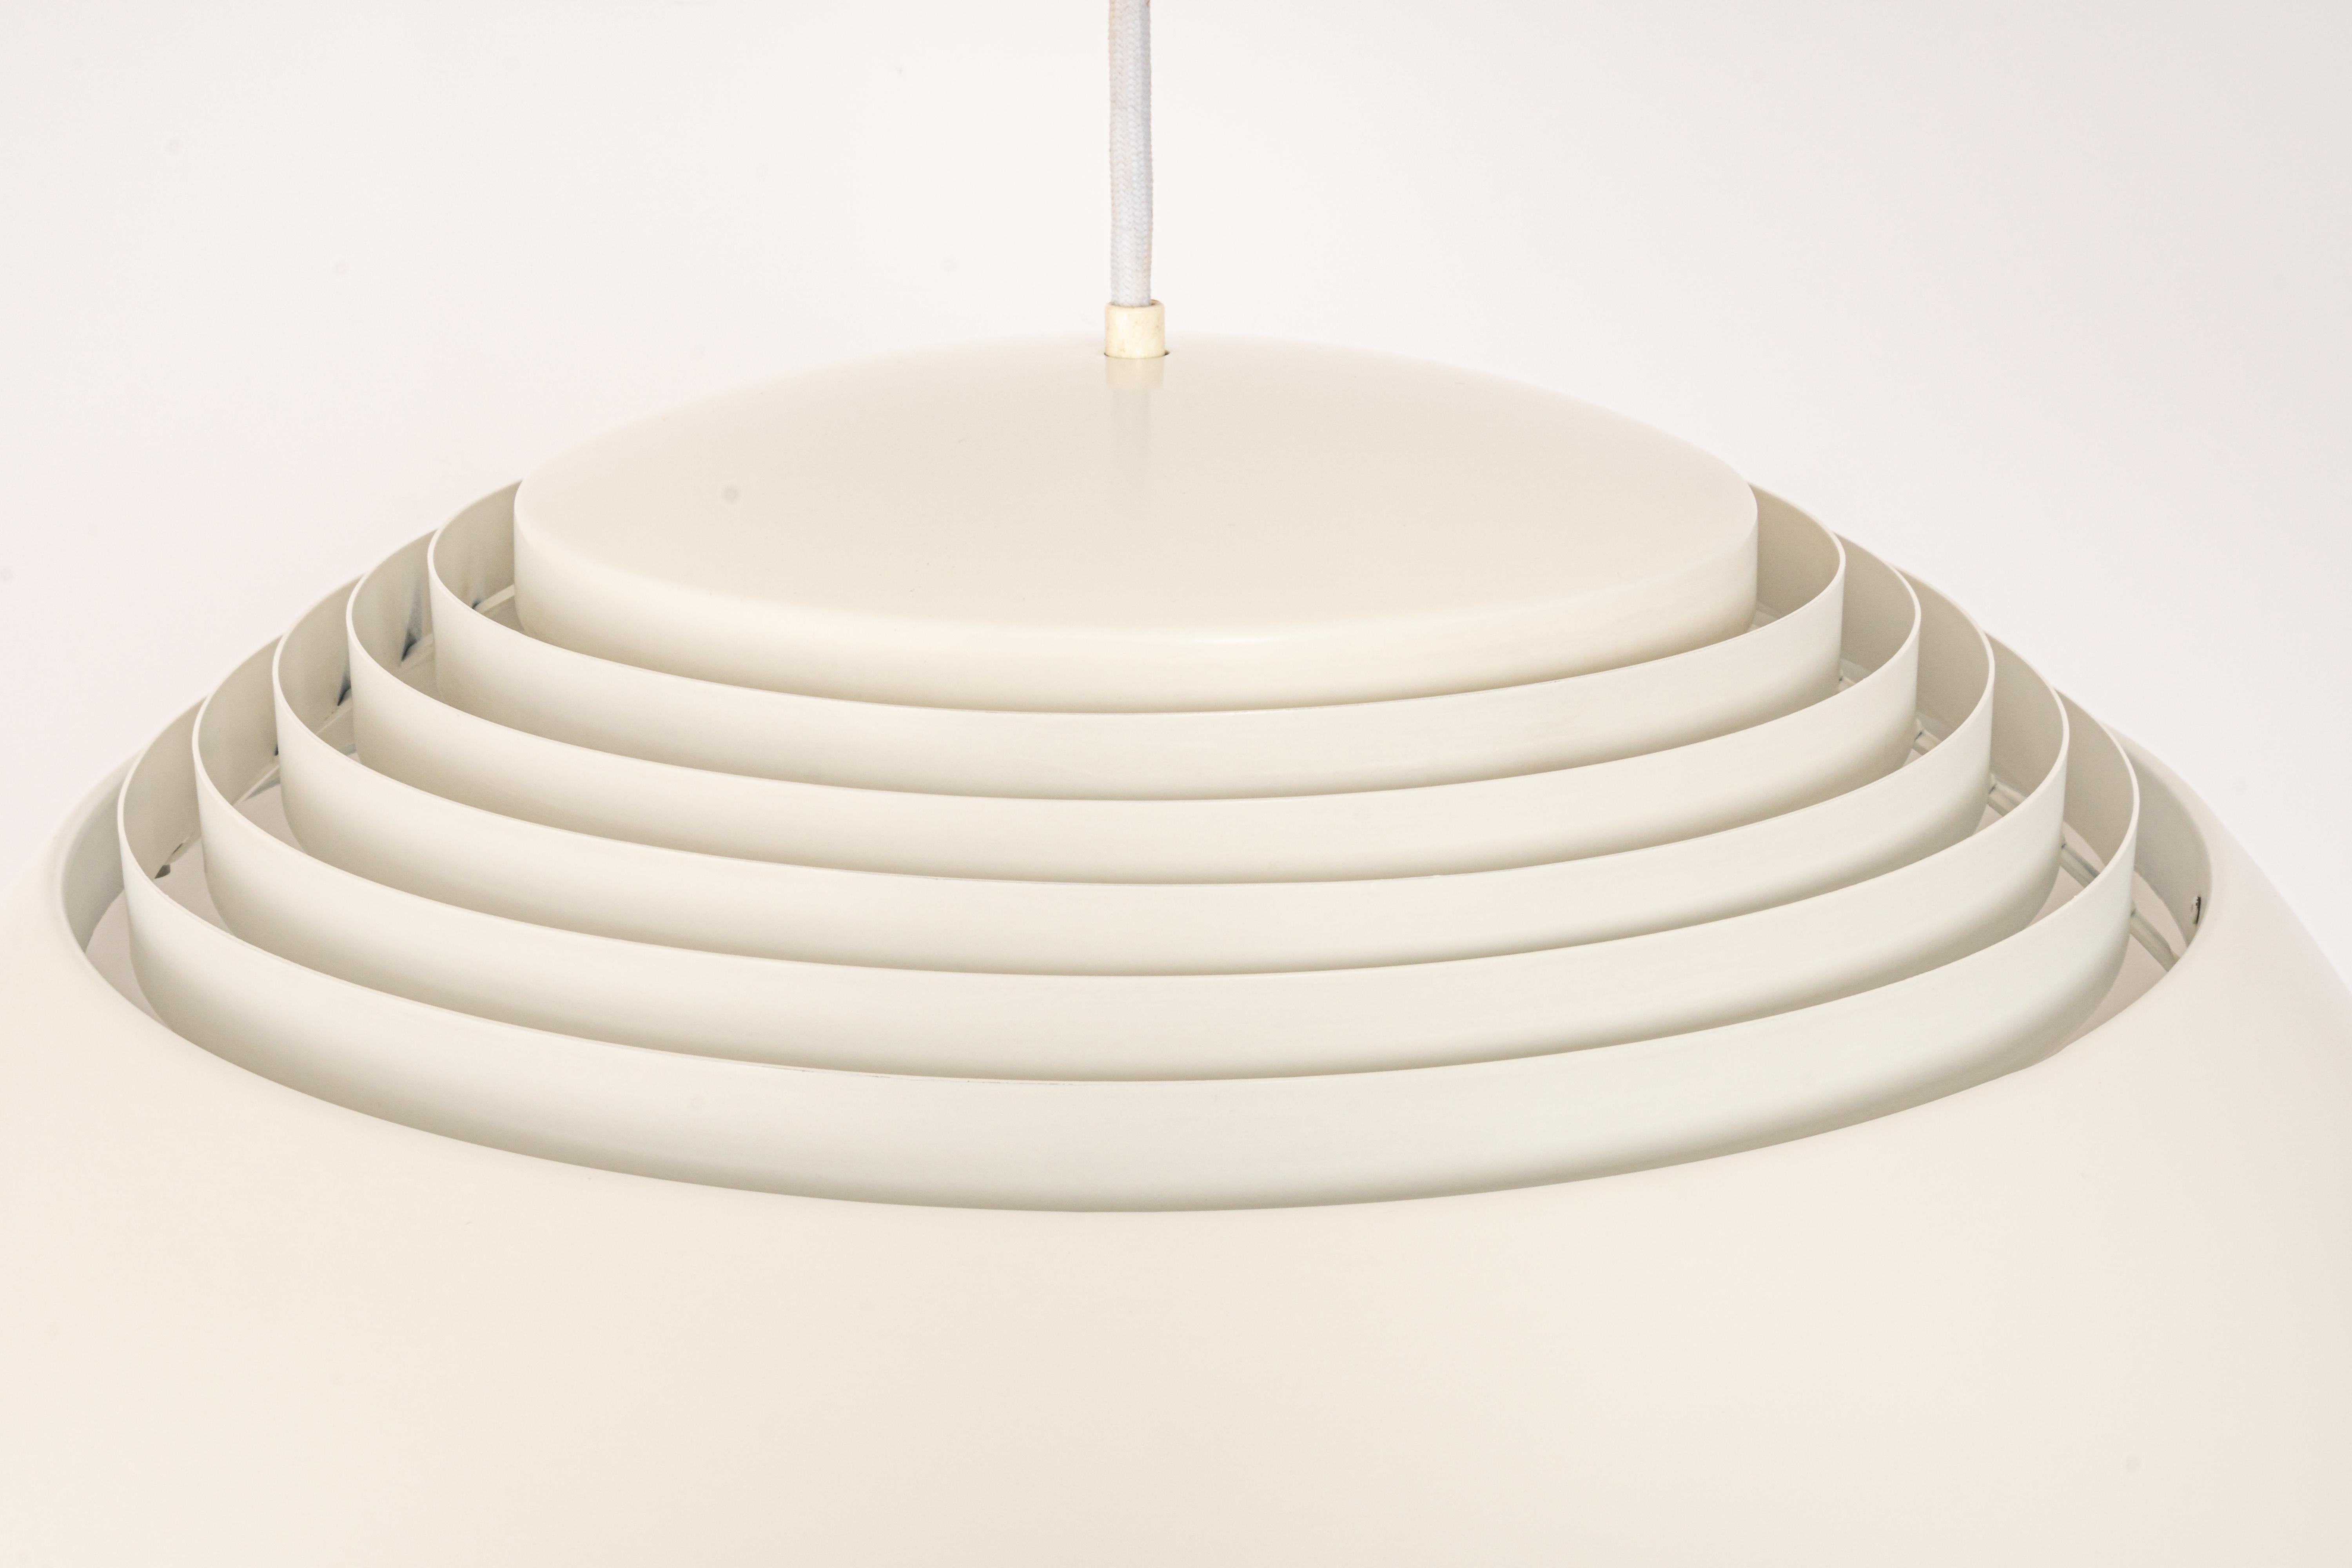 Large white Arne Jacobsen pendant light by Louis Poulsen, AJ Royal, 1960s

It needs 4 x standard bulbs ( up to 100 W for each bulb)
Light bulbs are not included. It is possible to install this fixture in all countries (US, UK, Europe, Asia,